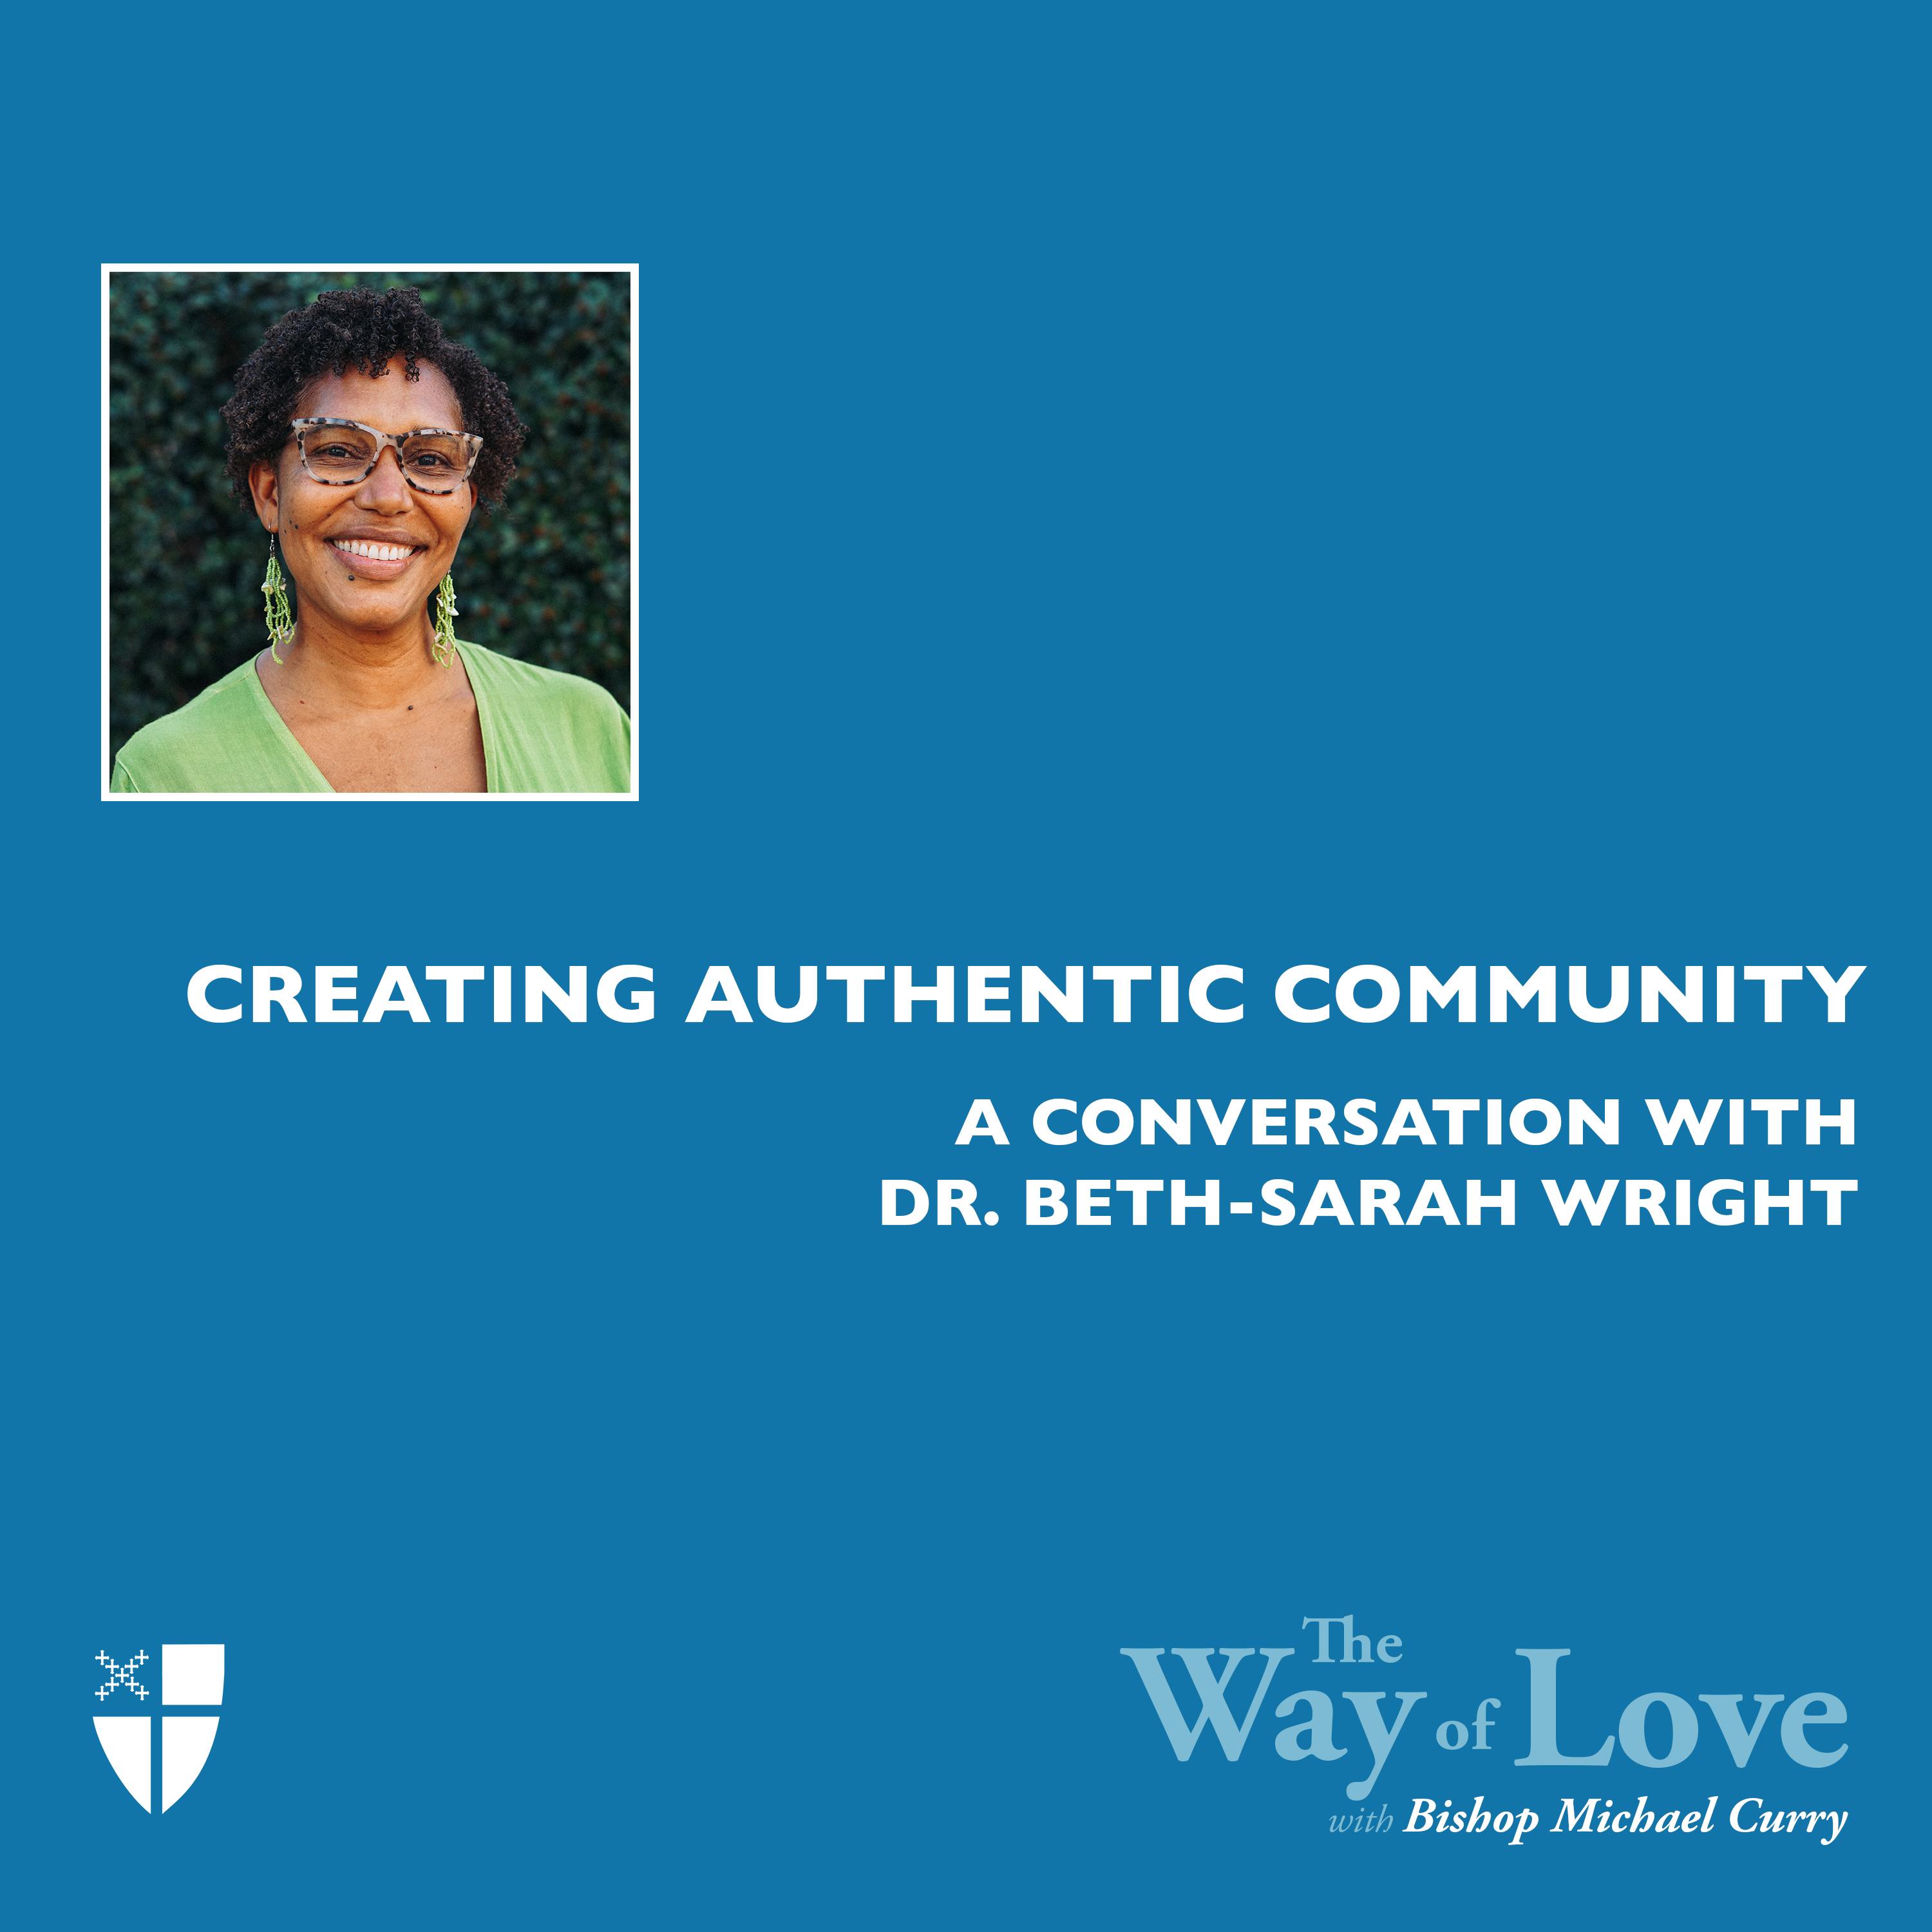 Creating Authentic Community with Dr. Beth-Sarah Wright